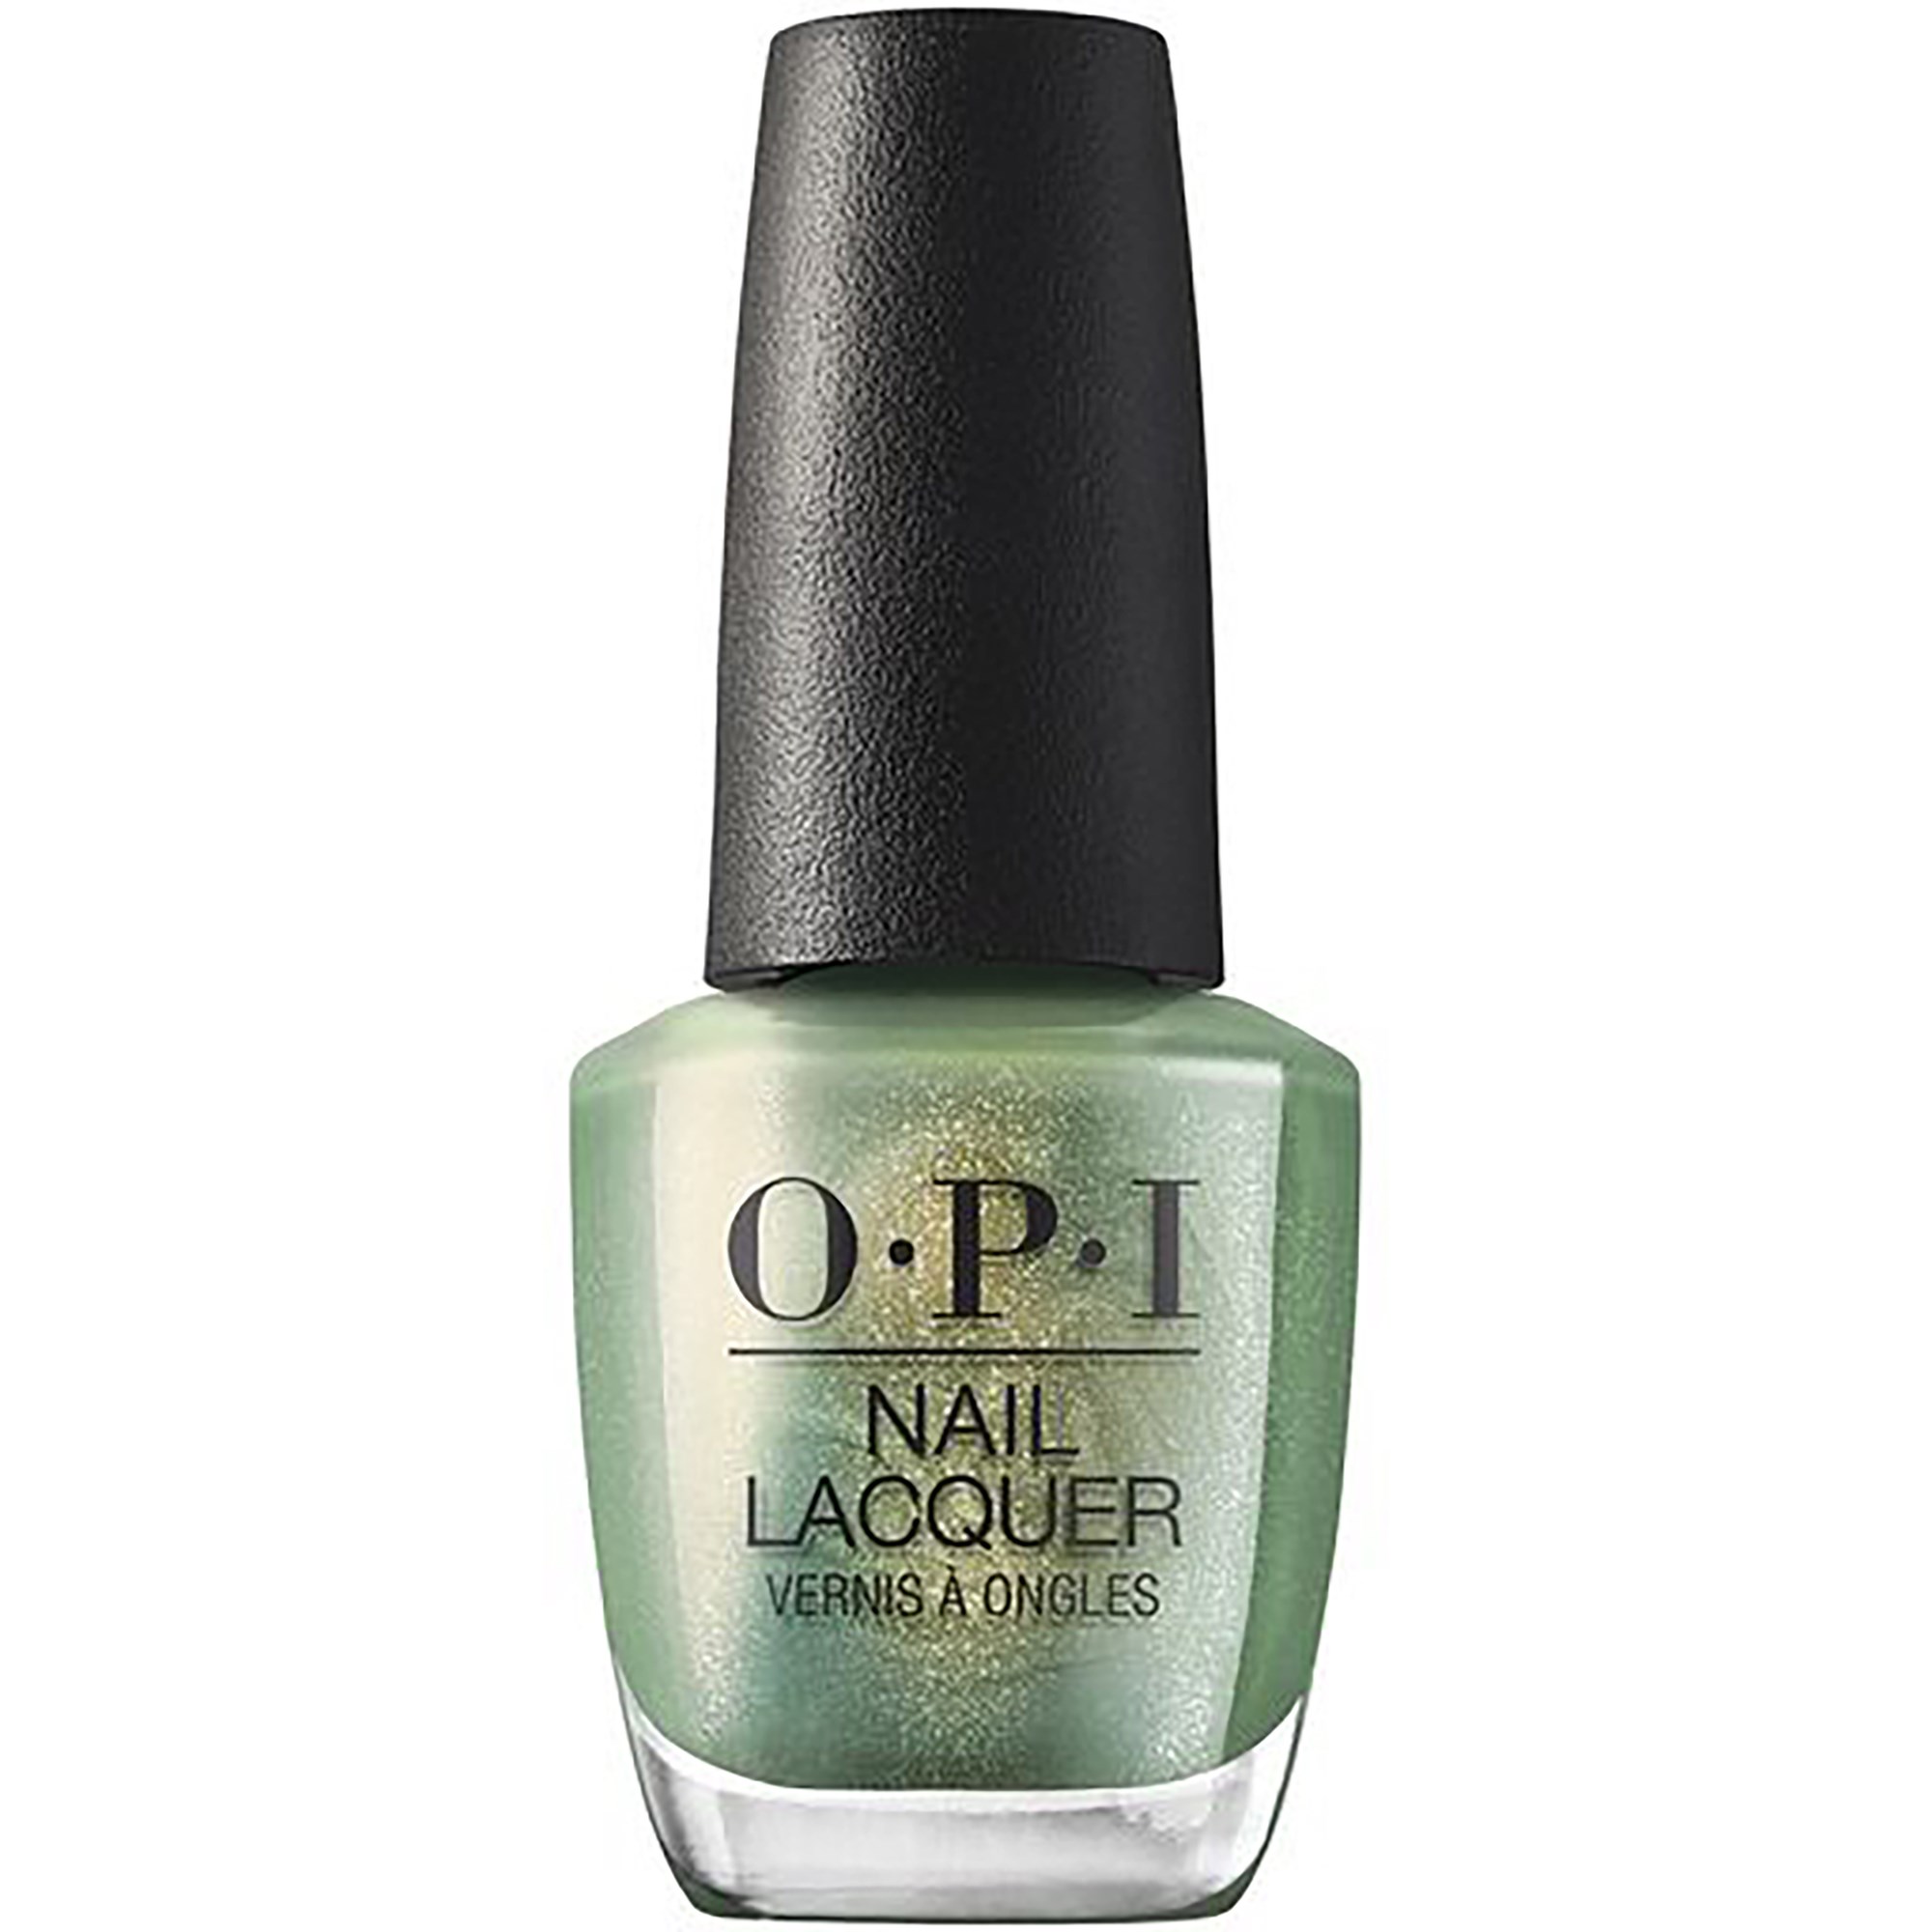 OPI Nail Lacquer Jewel Be Bold Decked to the Pines